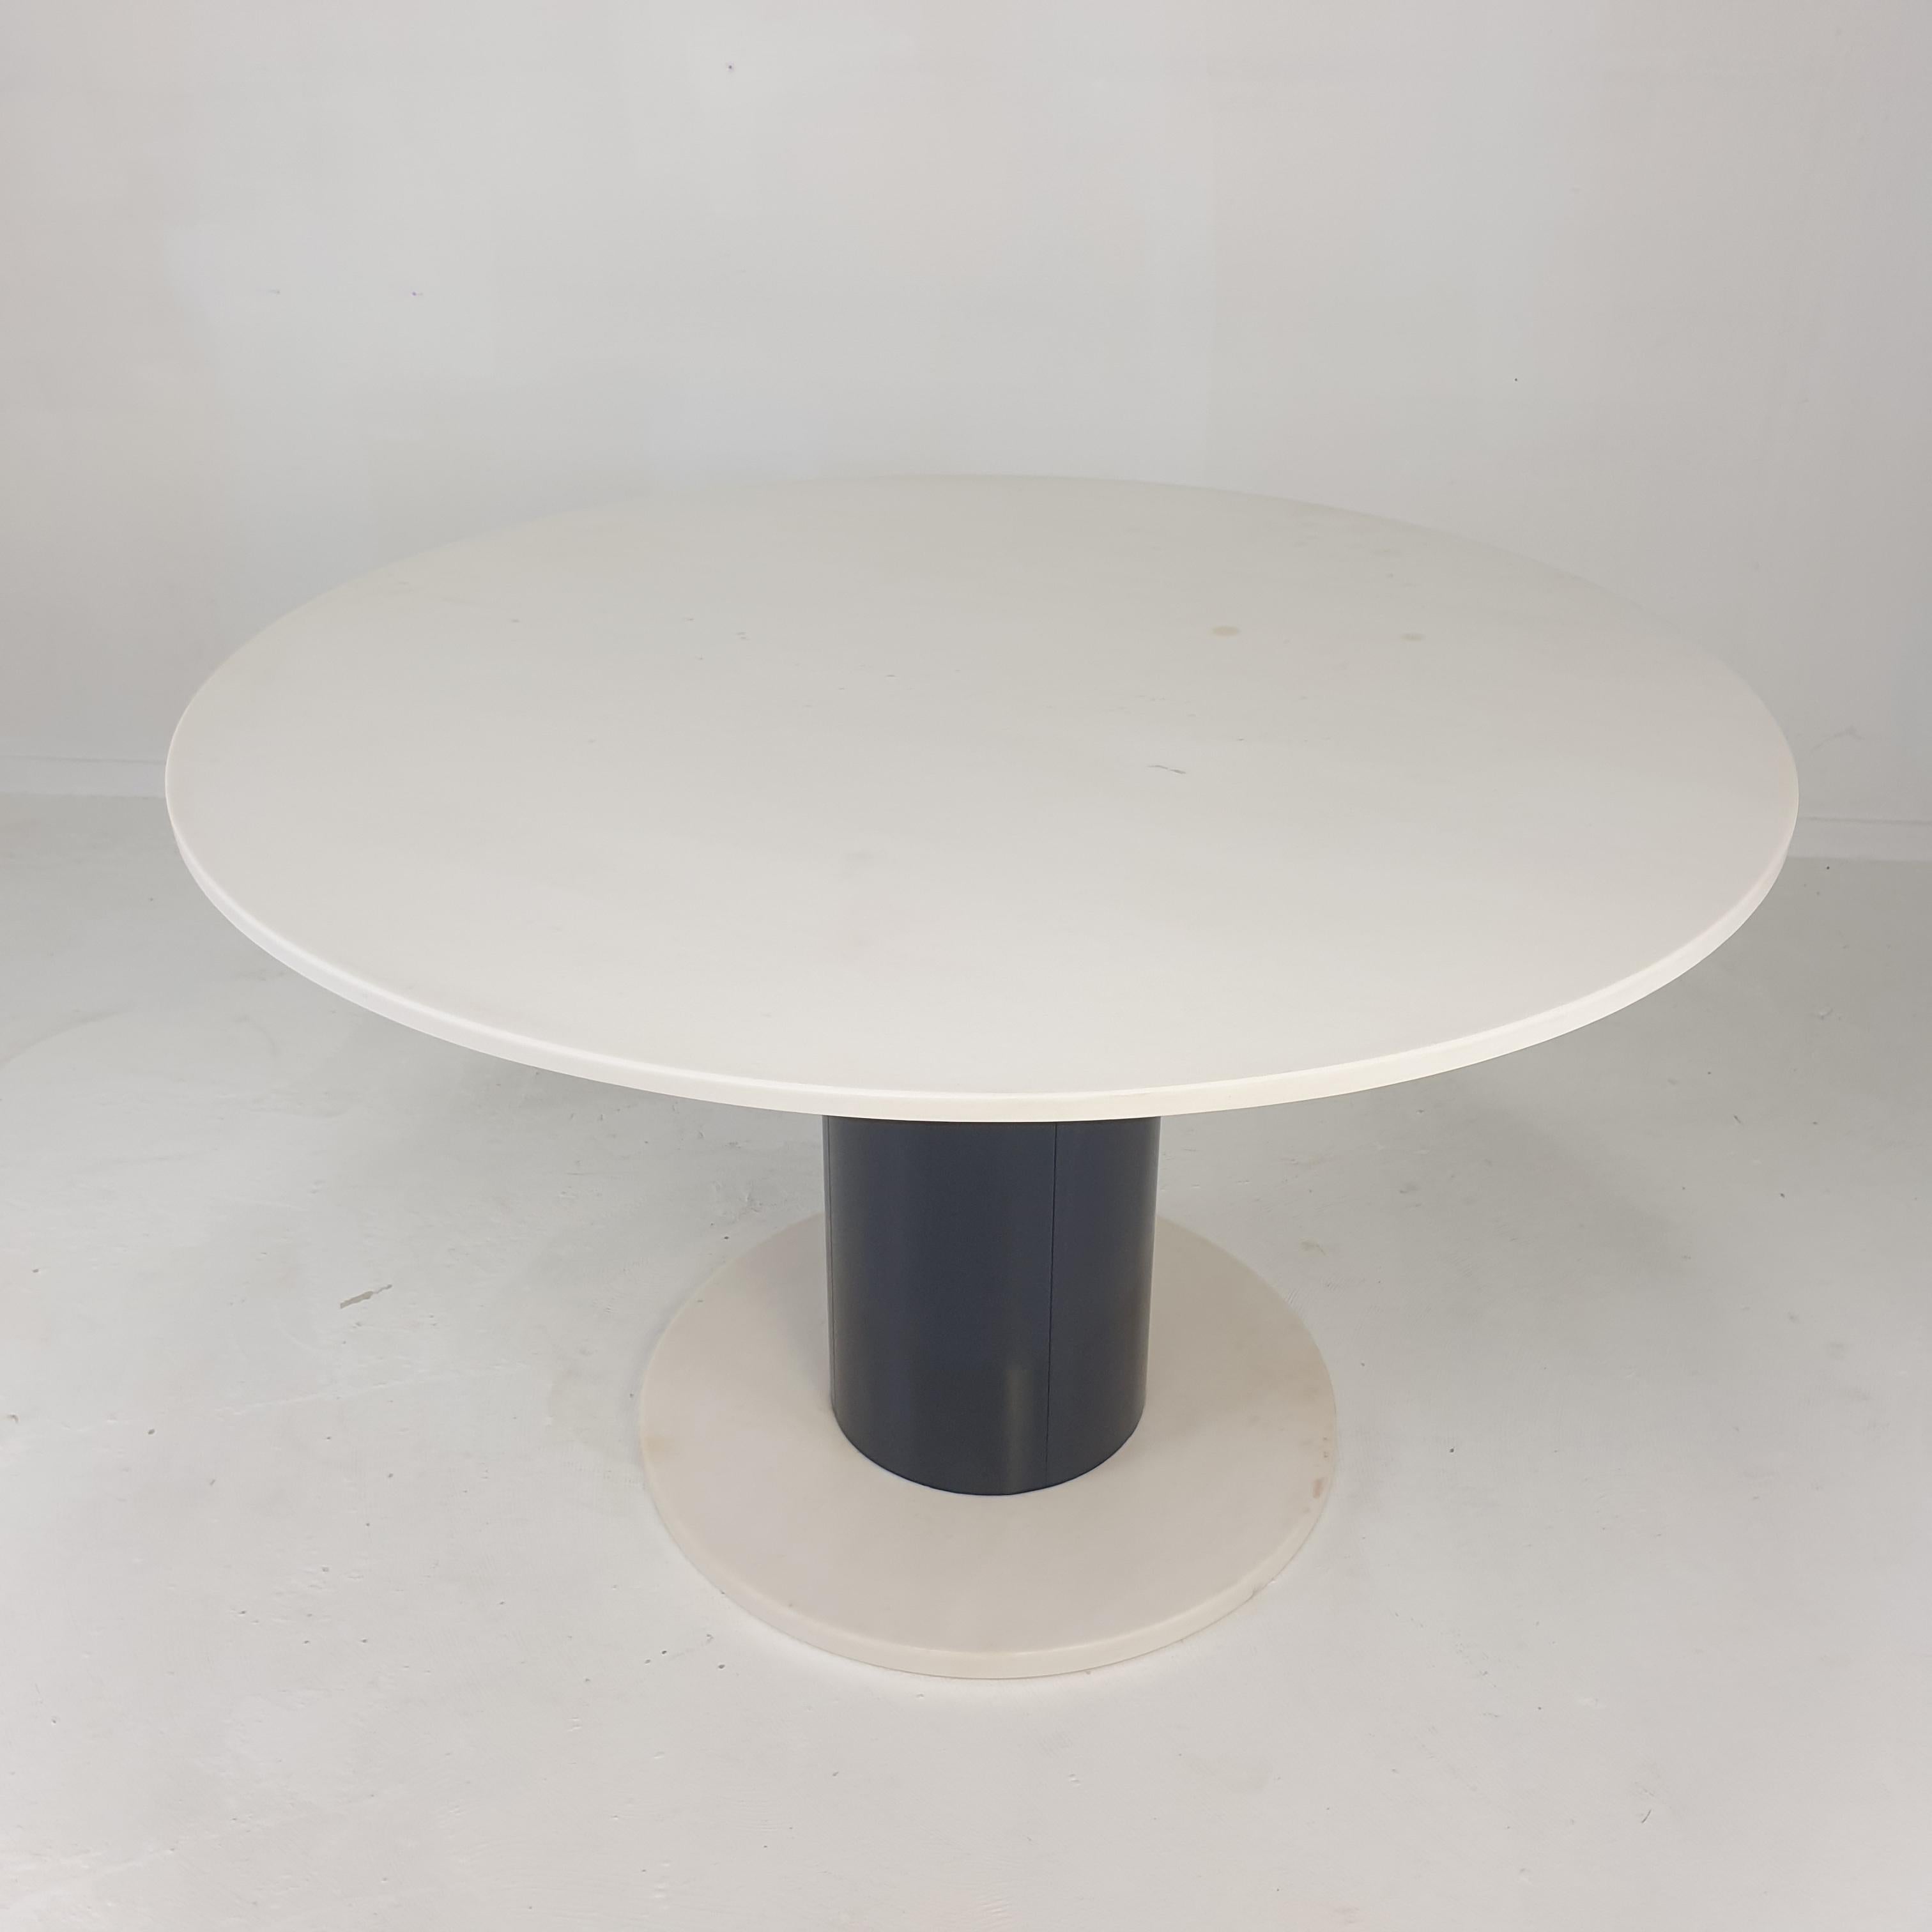 Late 20th Century Round Marble Dining Table in the Style of Ettore Sottsass, 1980's For Sale